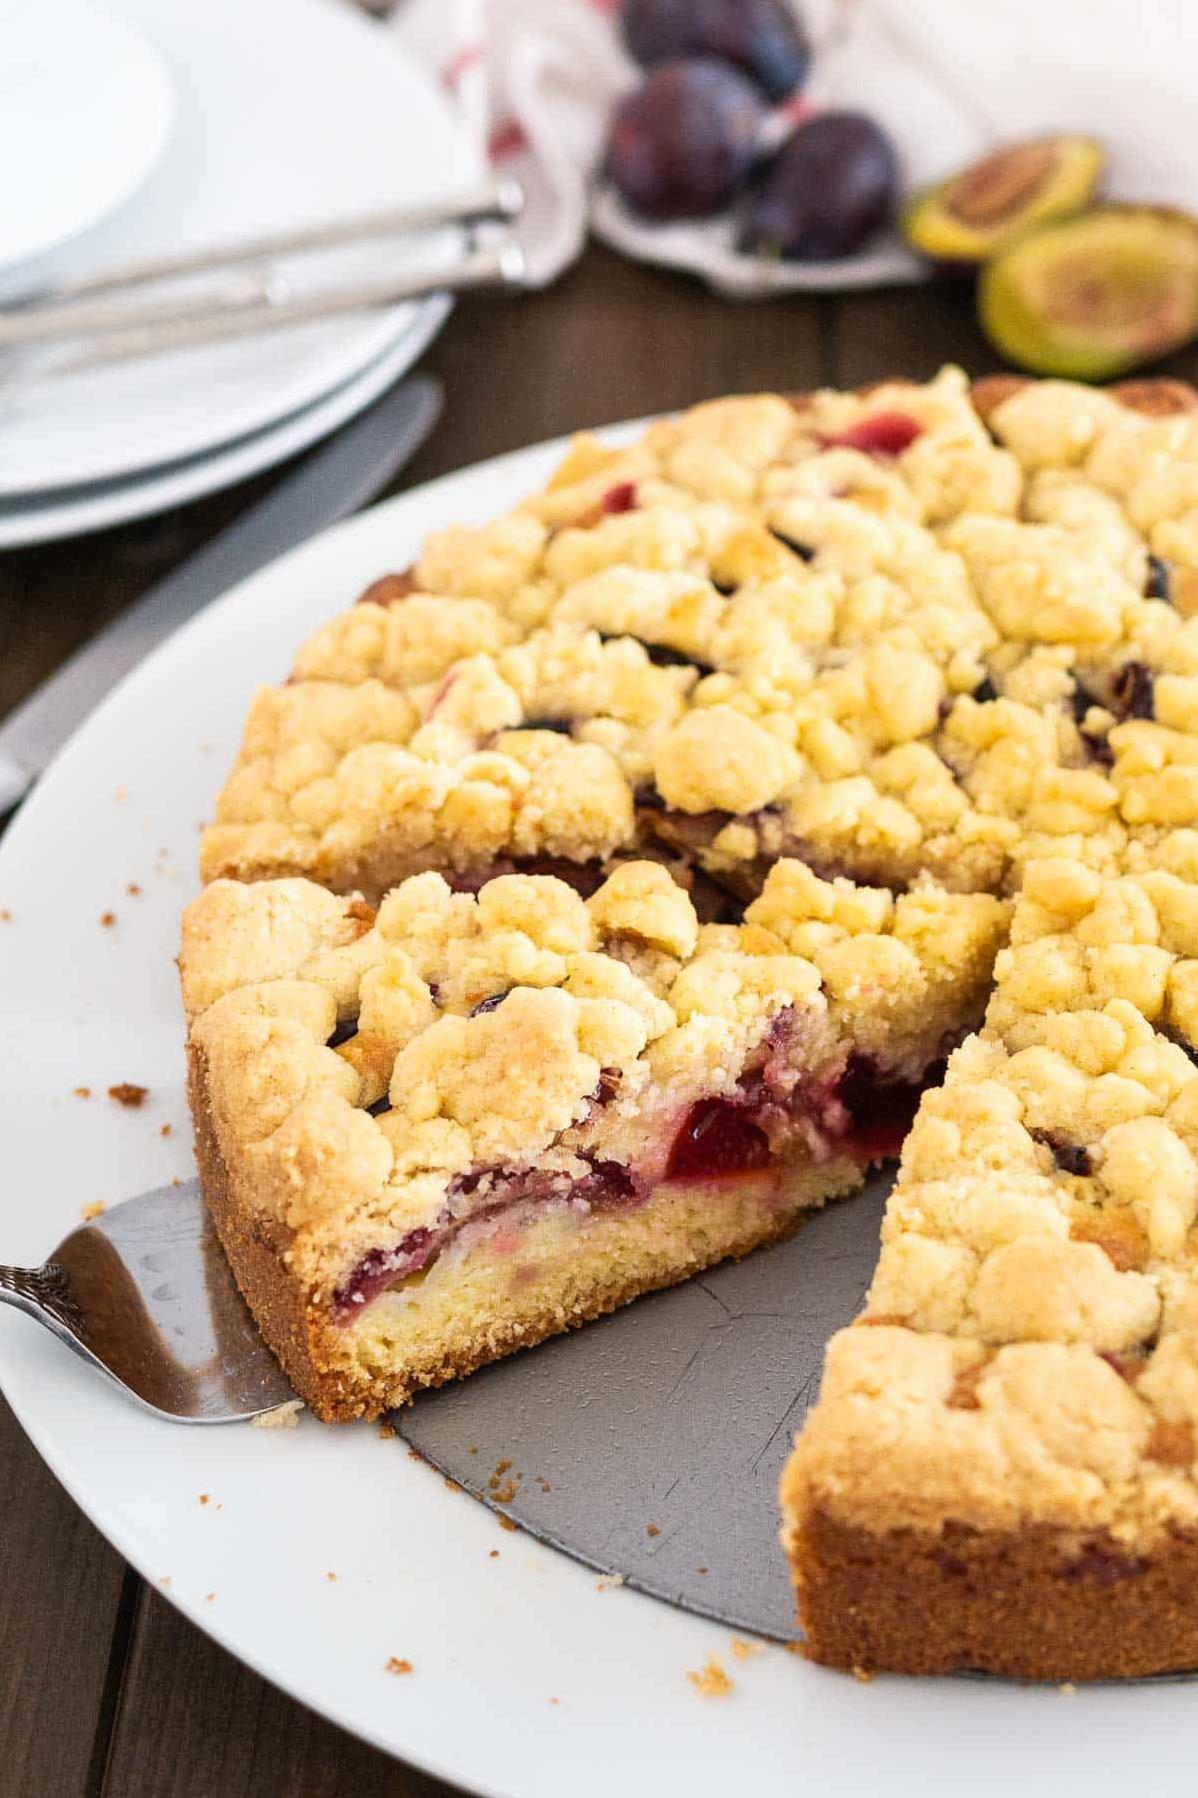  The golden crust is the perfect counterpoint to the juicy plums and crumbled almonds